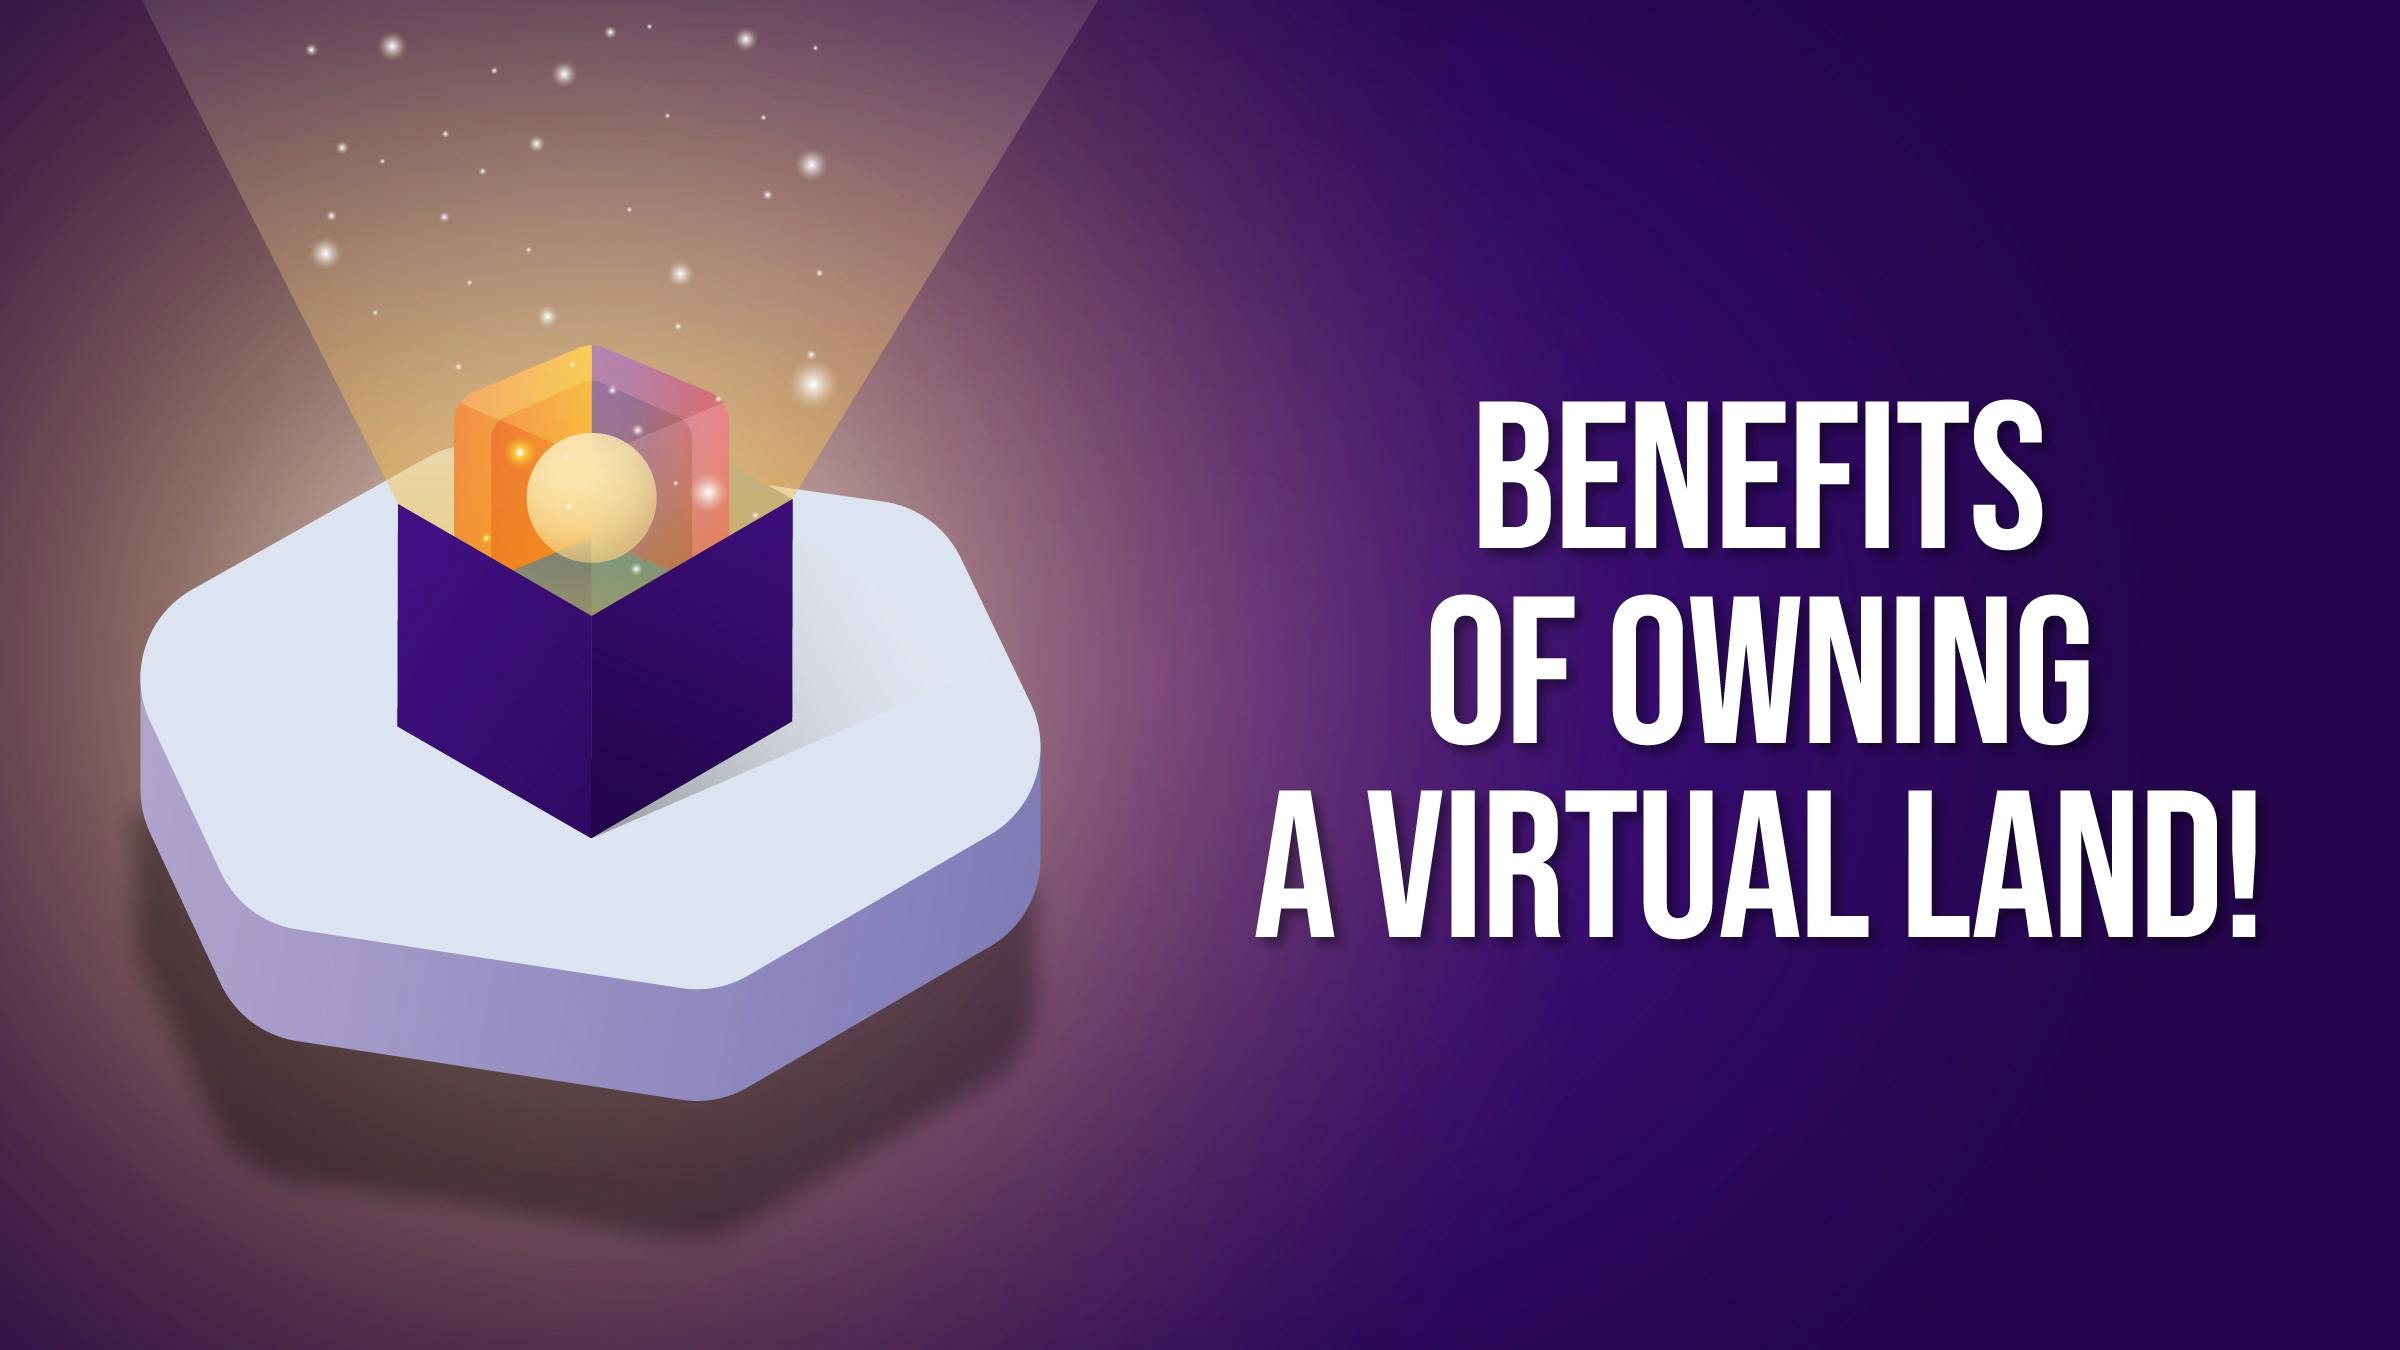 What are the Benefits of Owning a Virtual Land?